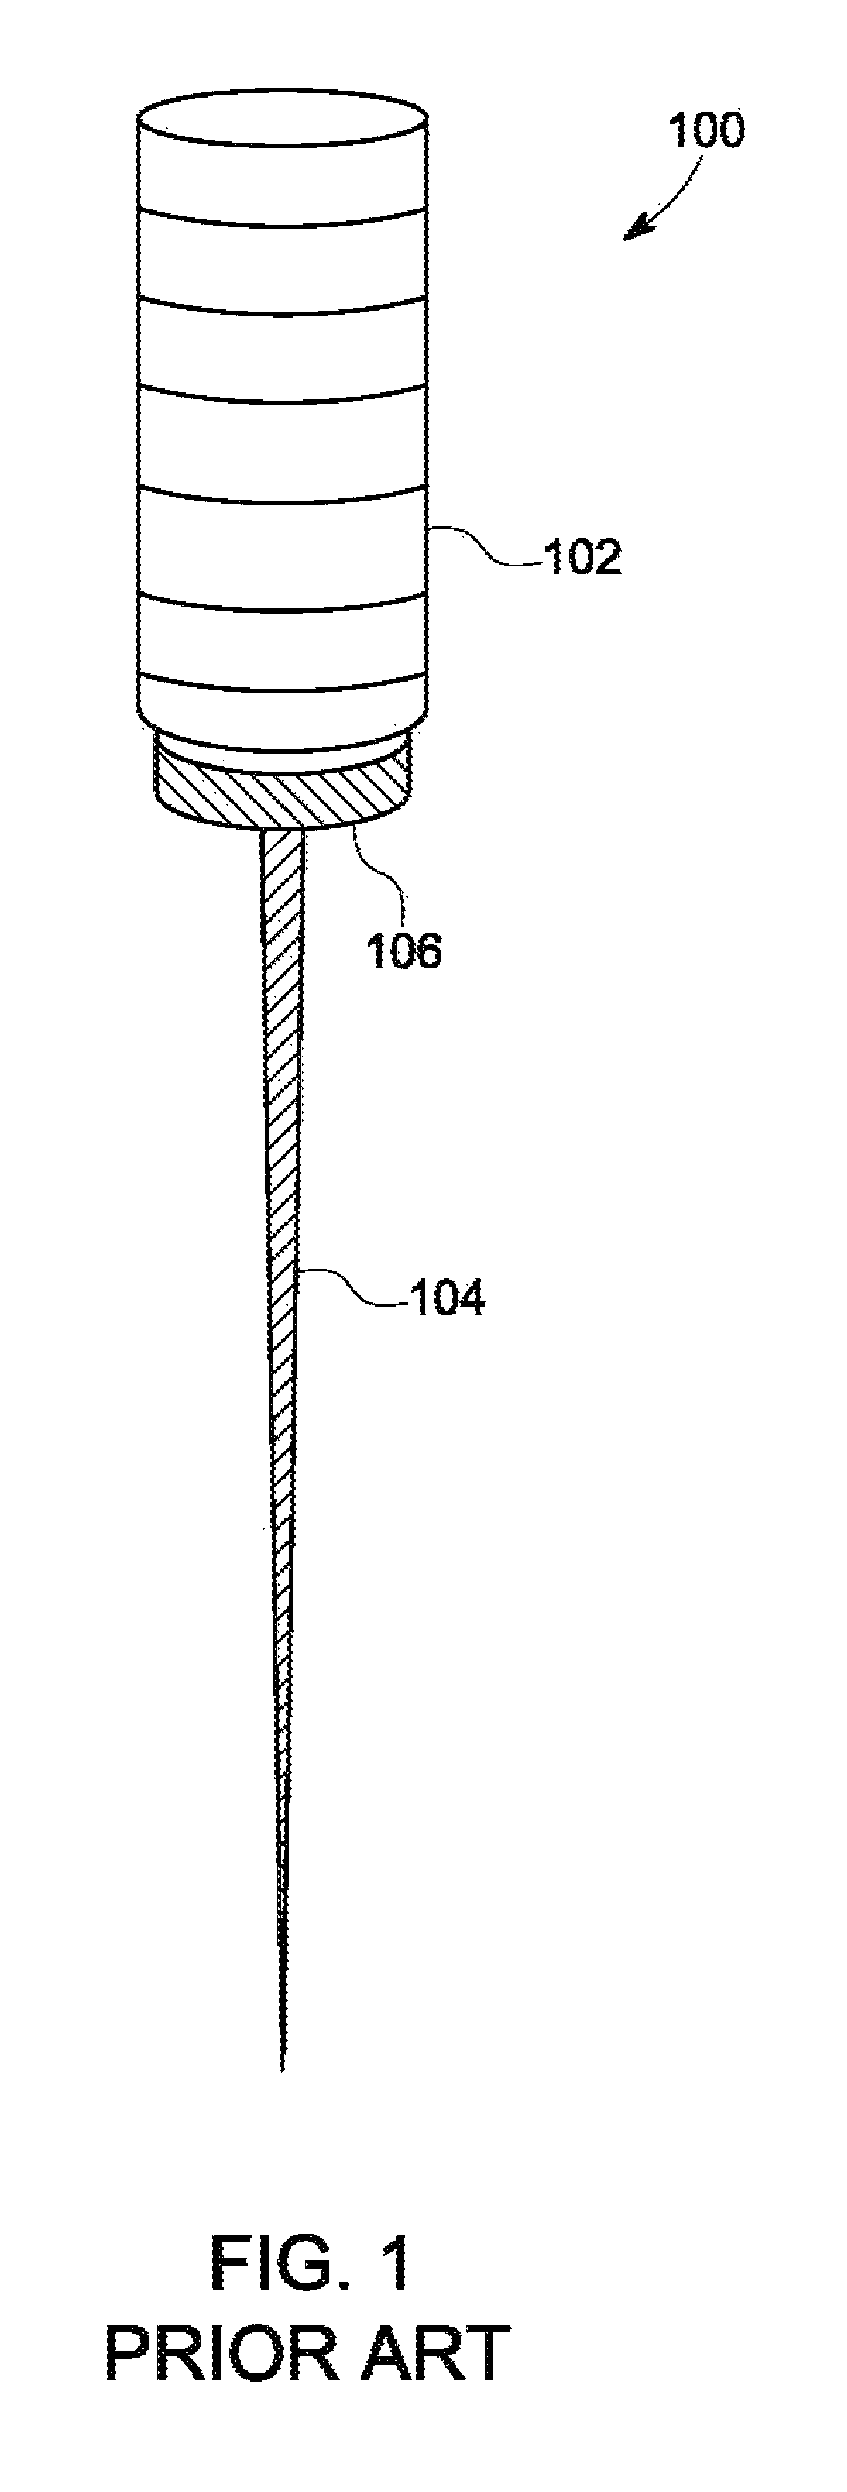 Endodontic hand file and methods for attachment